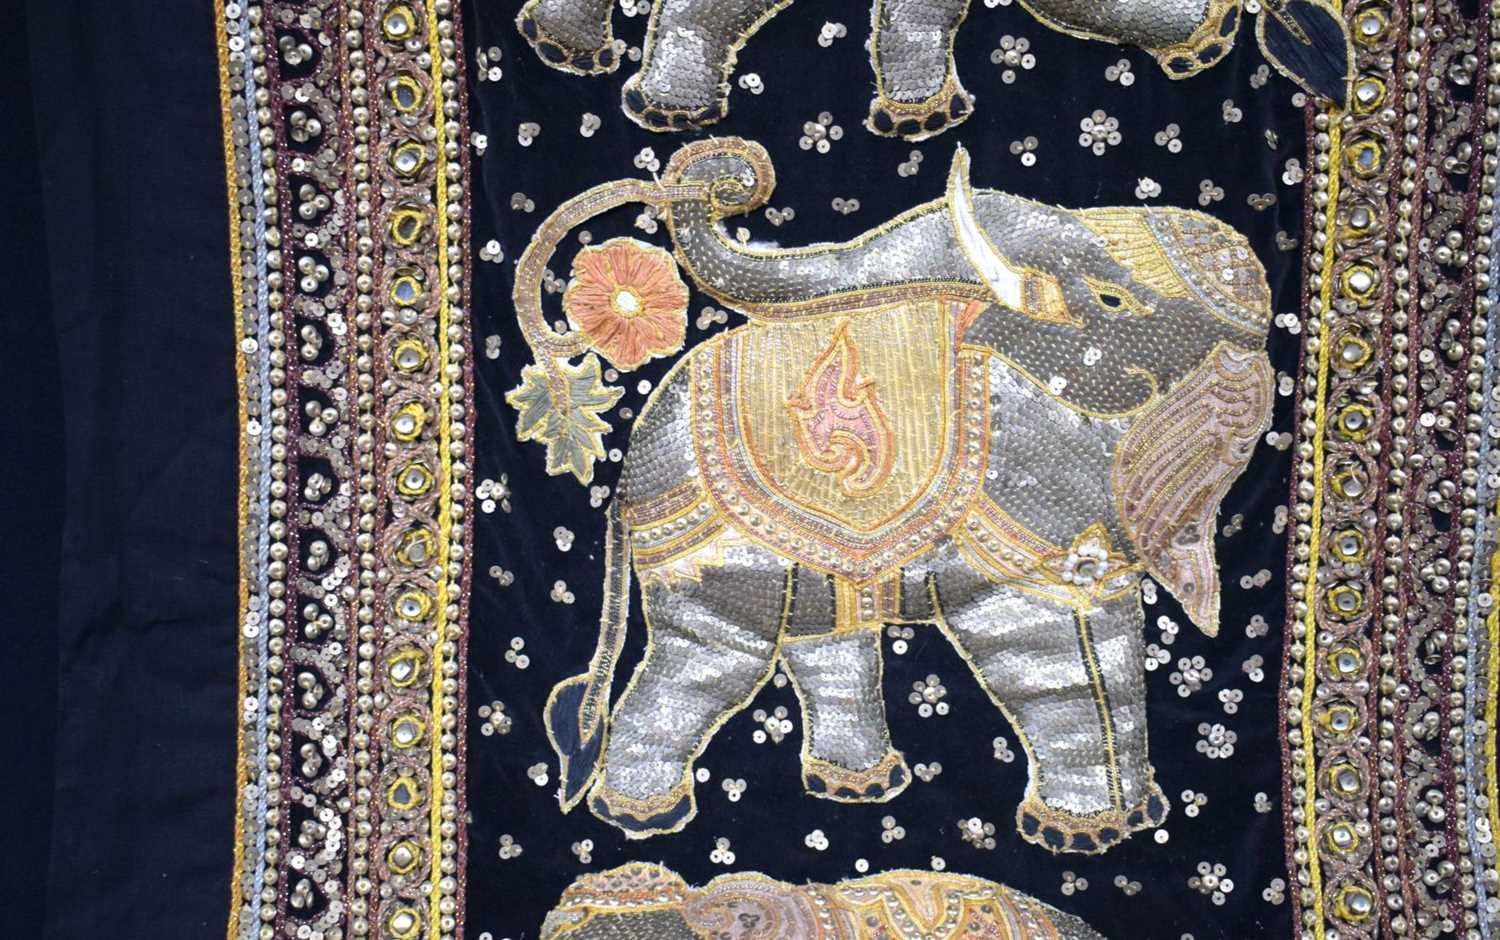 An Embroidered South East Asian Elephant wall hanging 104 x 60 cm. - Image 4 of 12